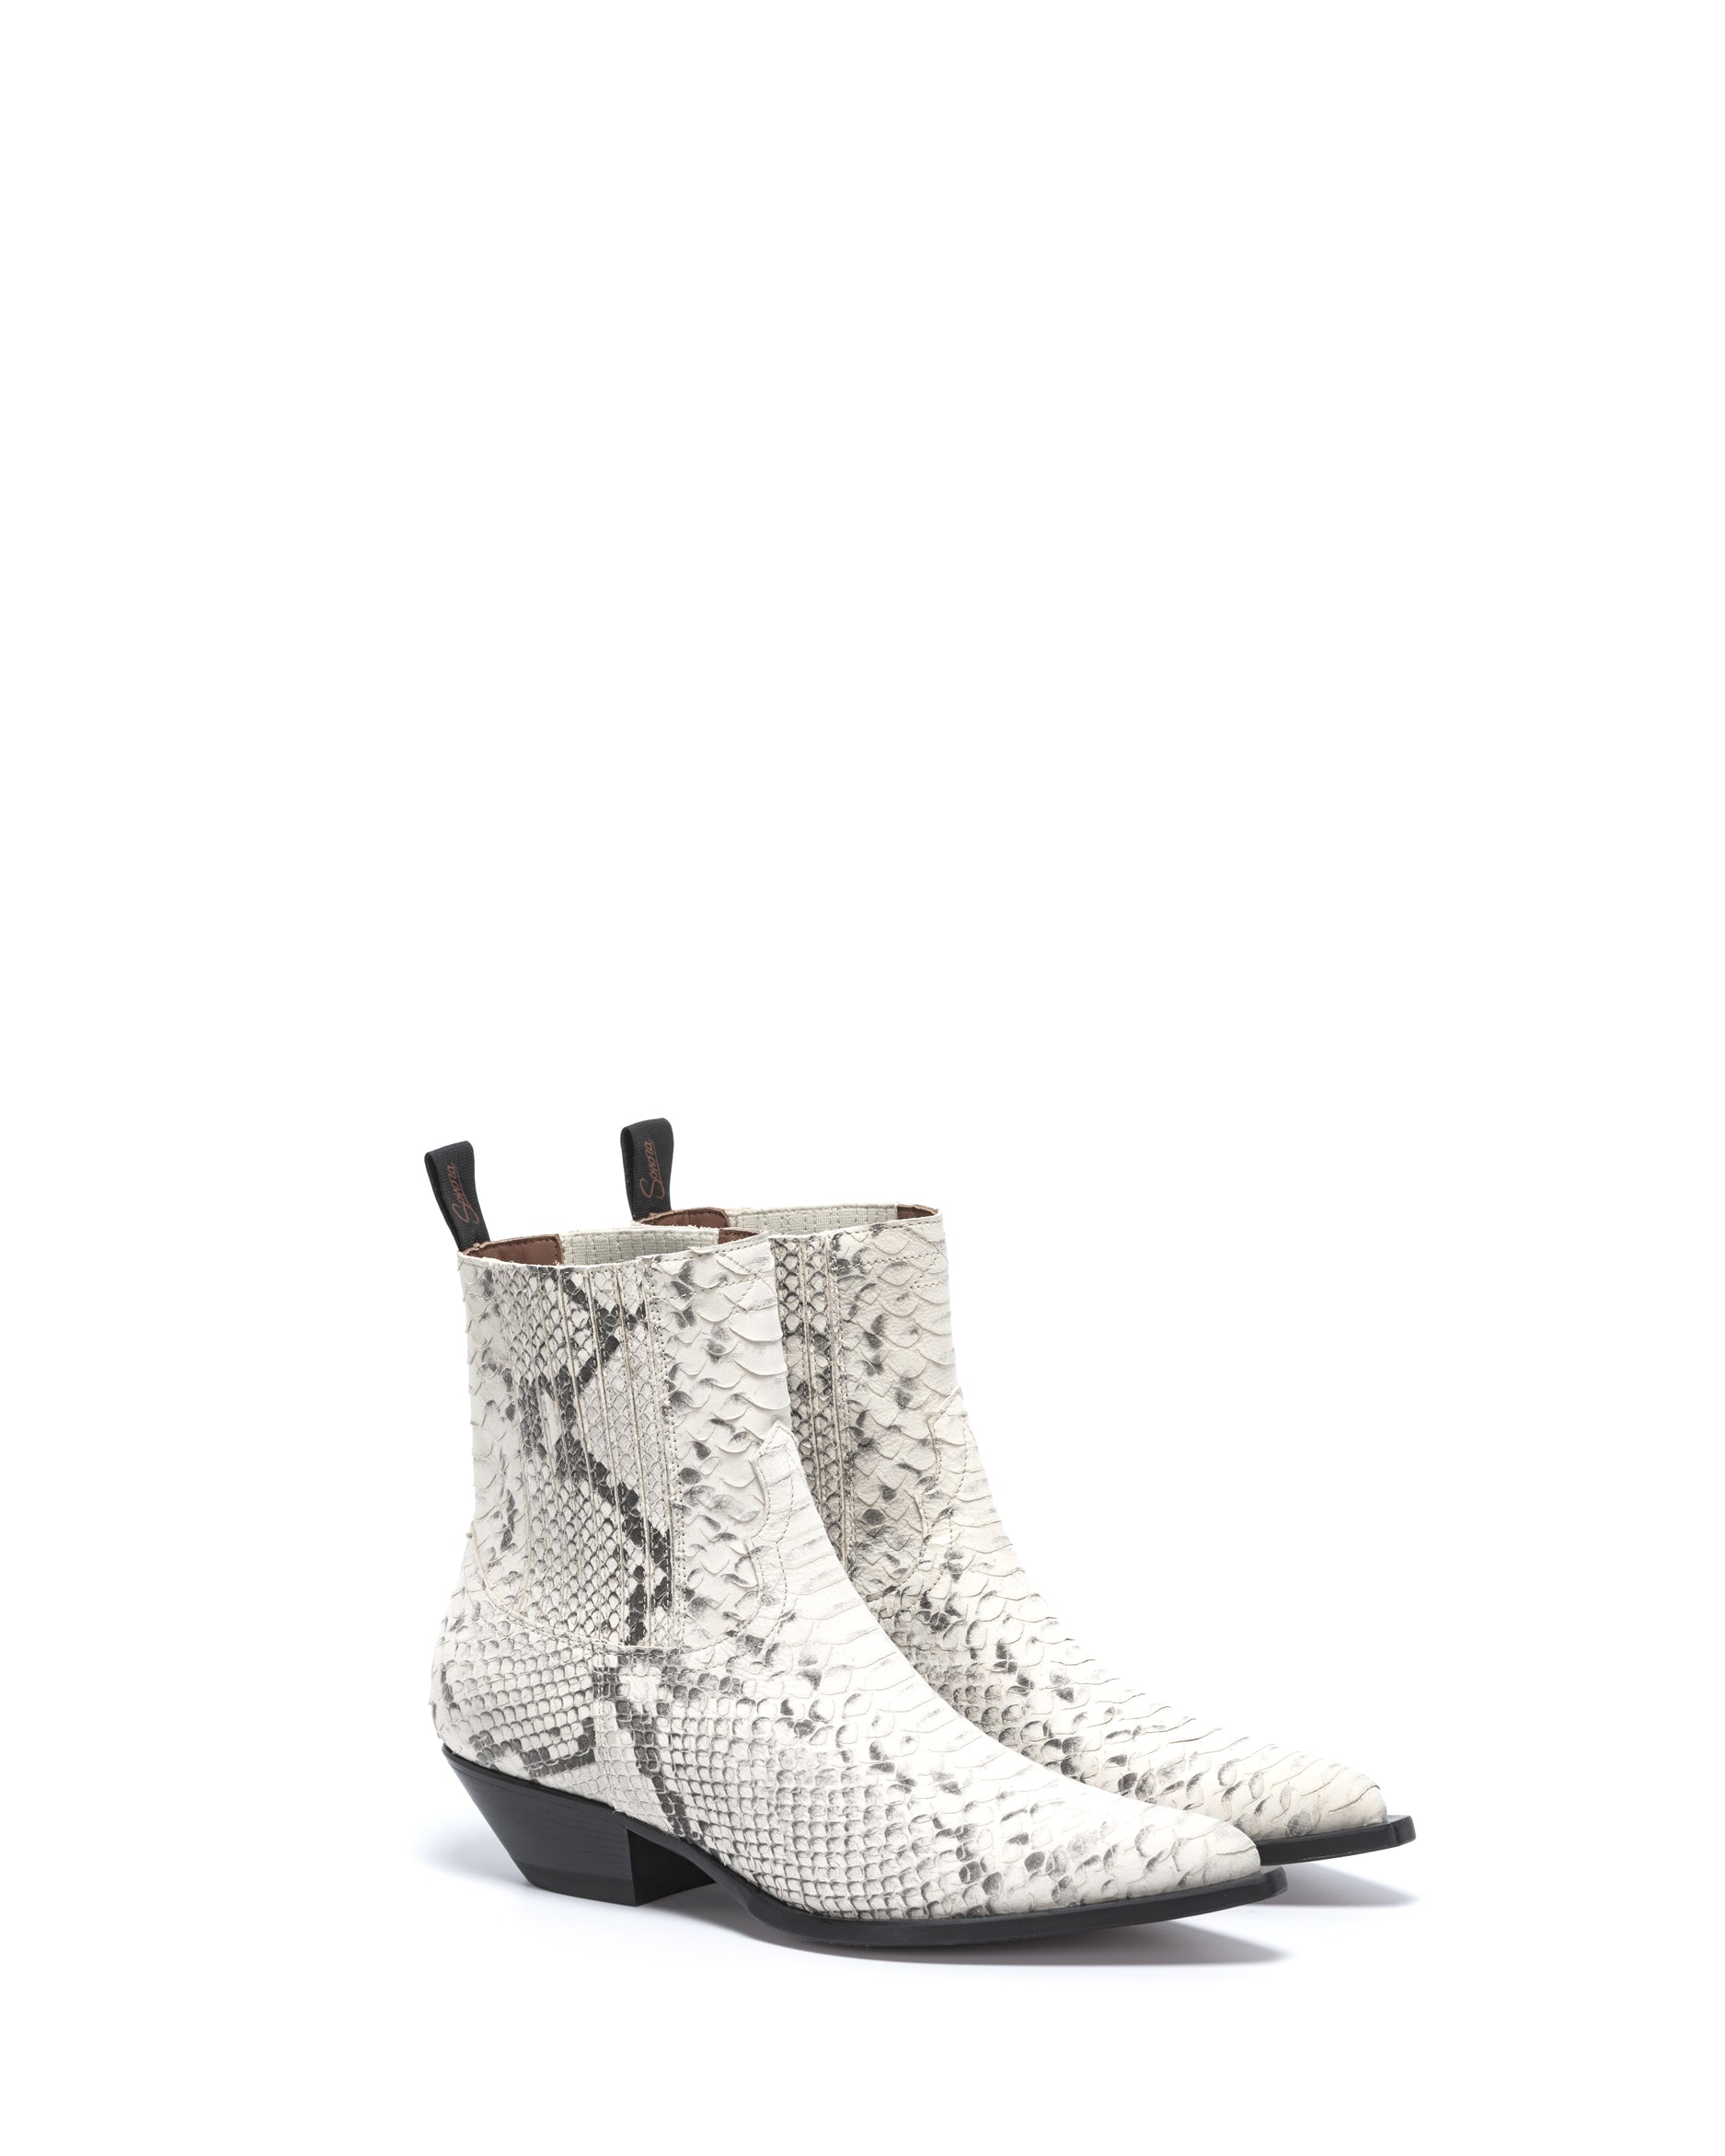 HIDALGO Men's Ankle Boots in Grey Printed Python